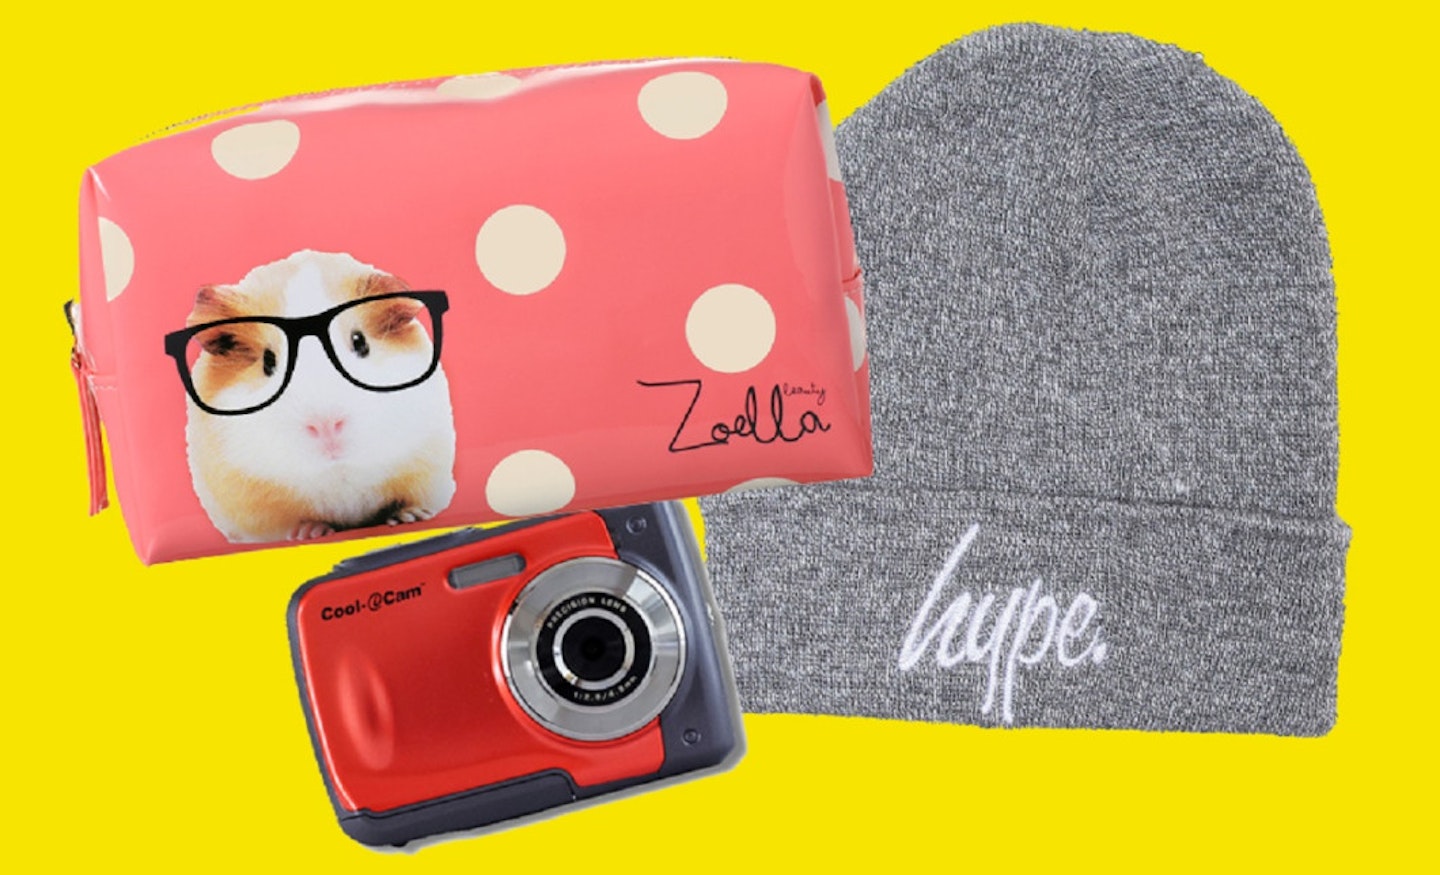 GALLERY >> 15 Gifts For Tricky To Buy For Teens